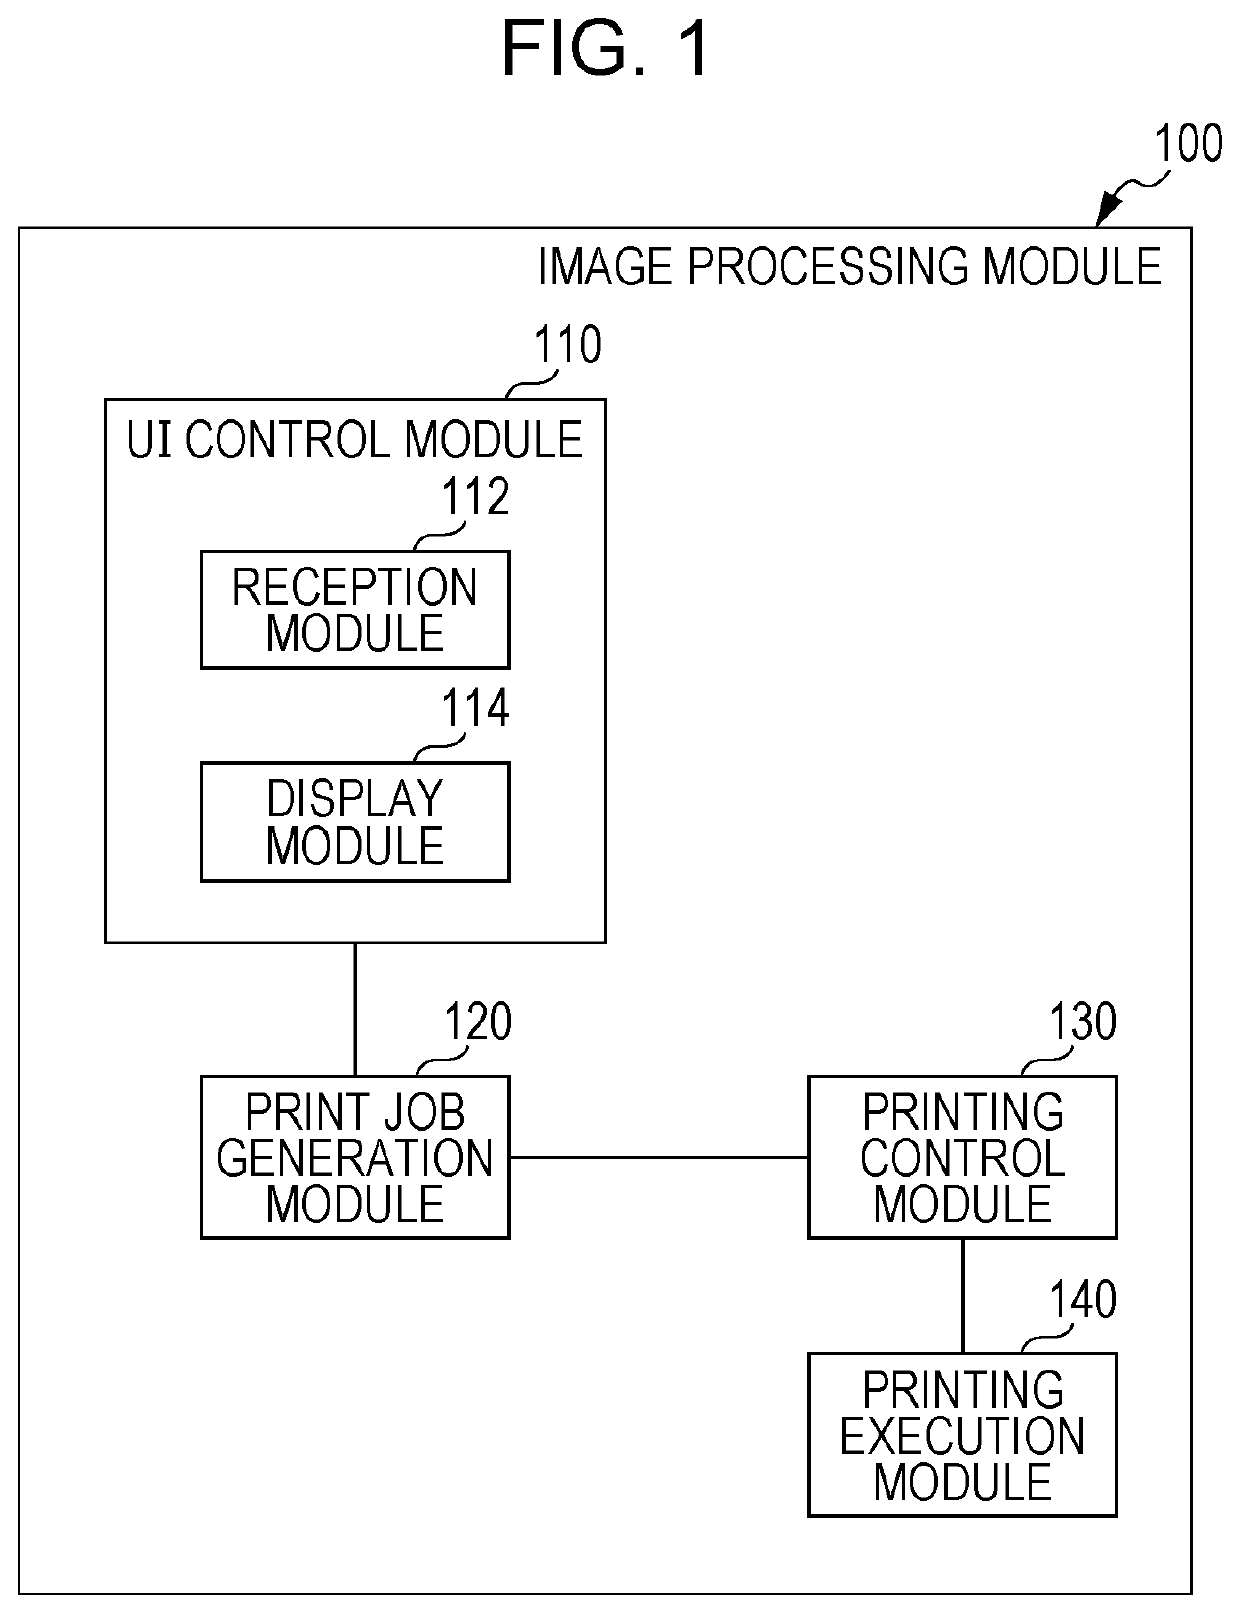 Image processing apparatus, non-transitory computer readable medium, and method for processing image